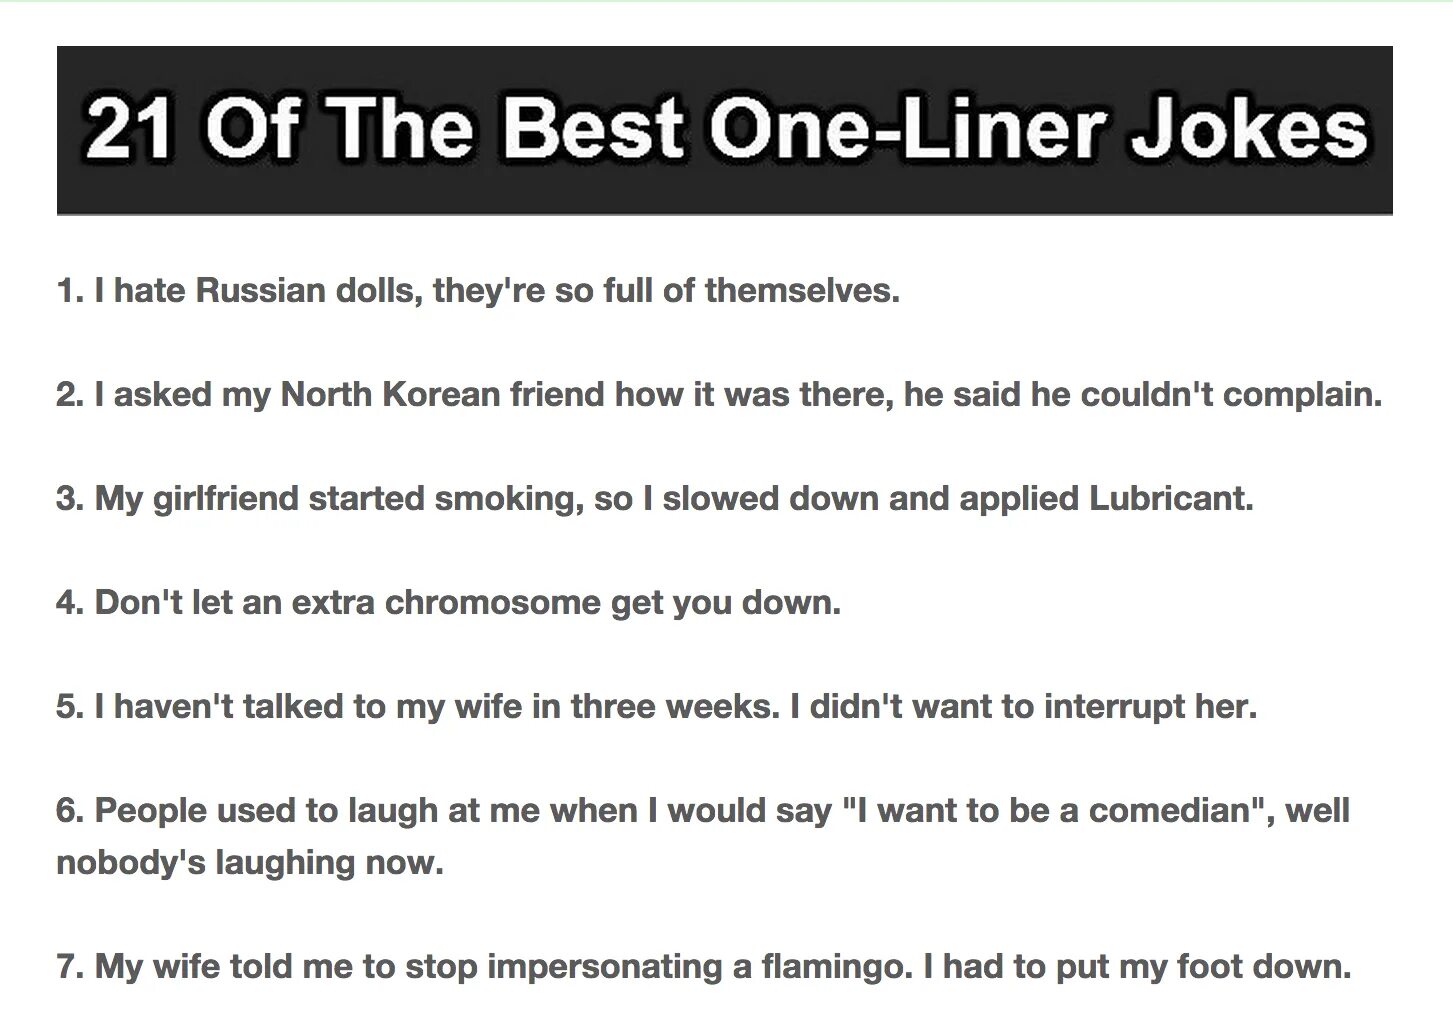 One line jokes. Funny one Liners. One Liner jokes comedian. Great one Liners for dating. Good ones текст